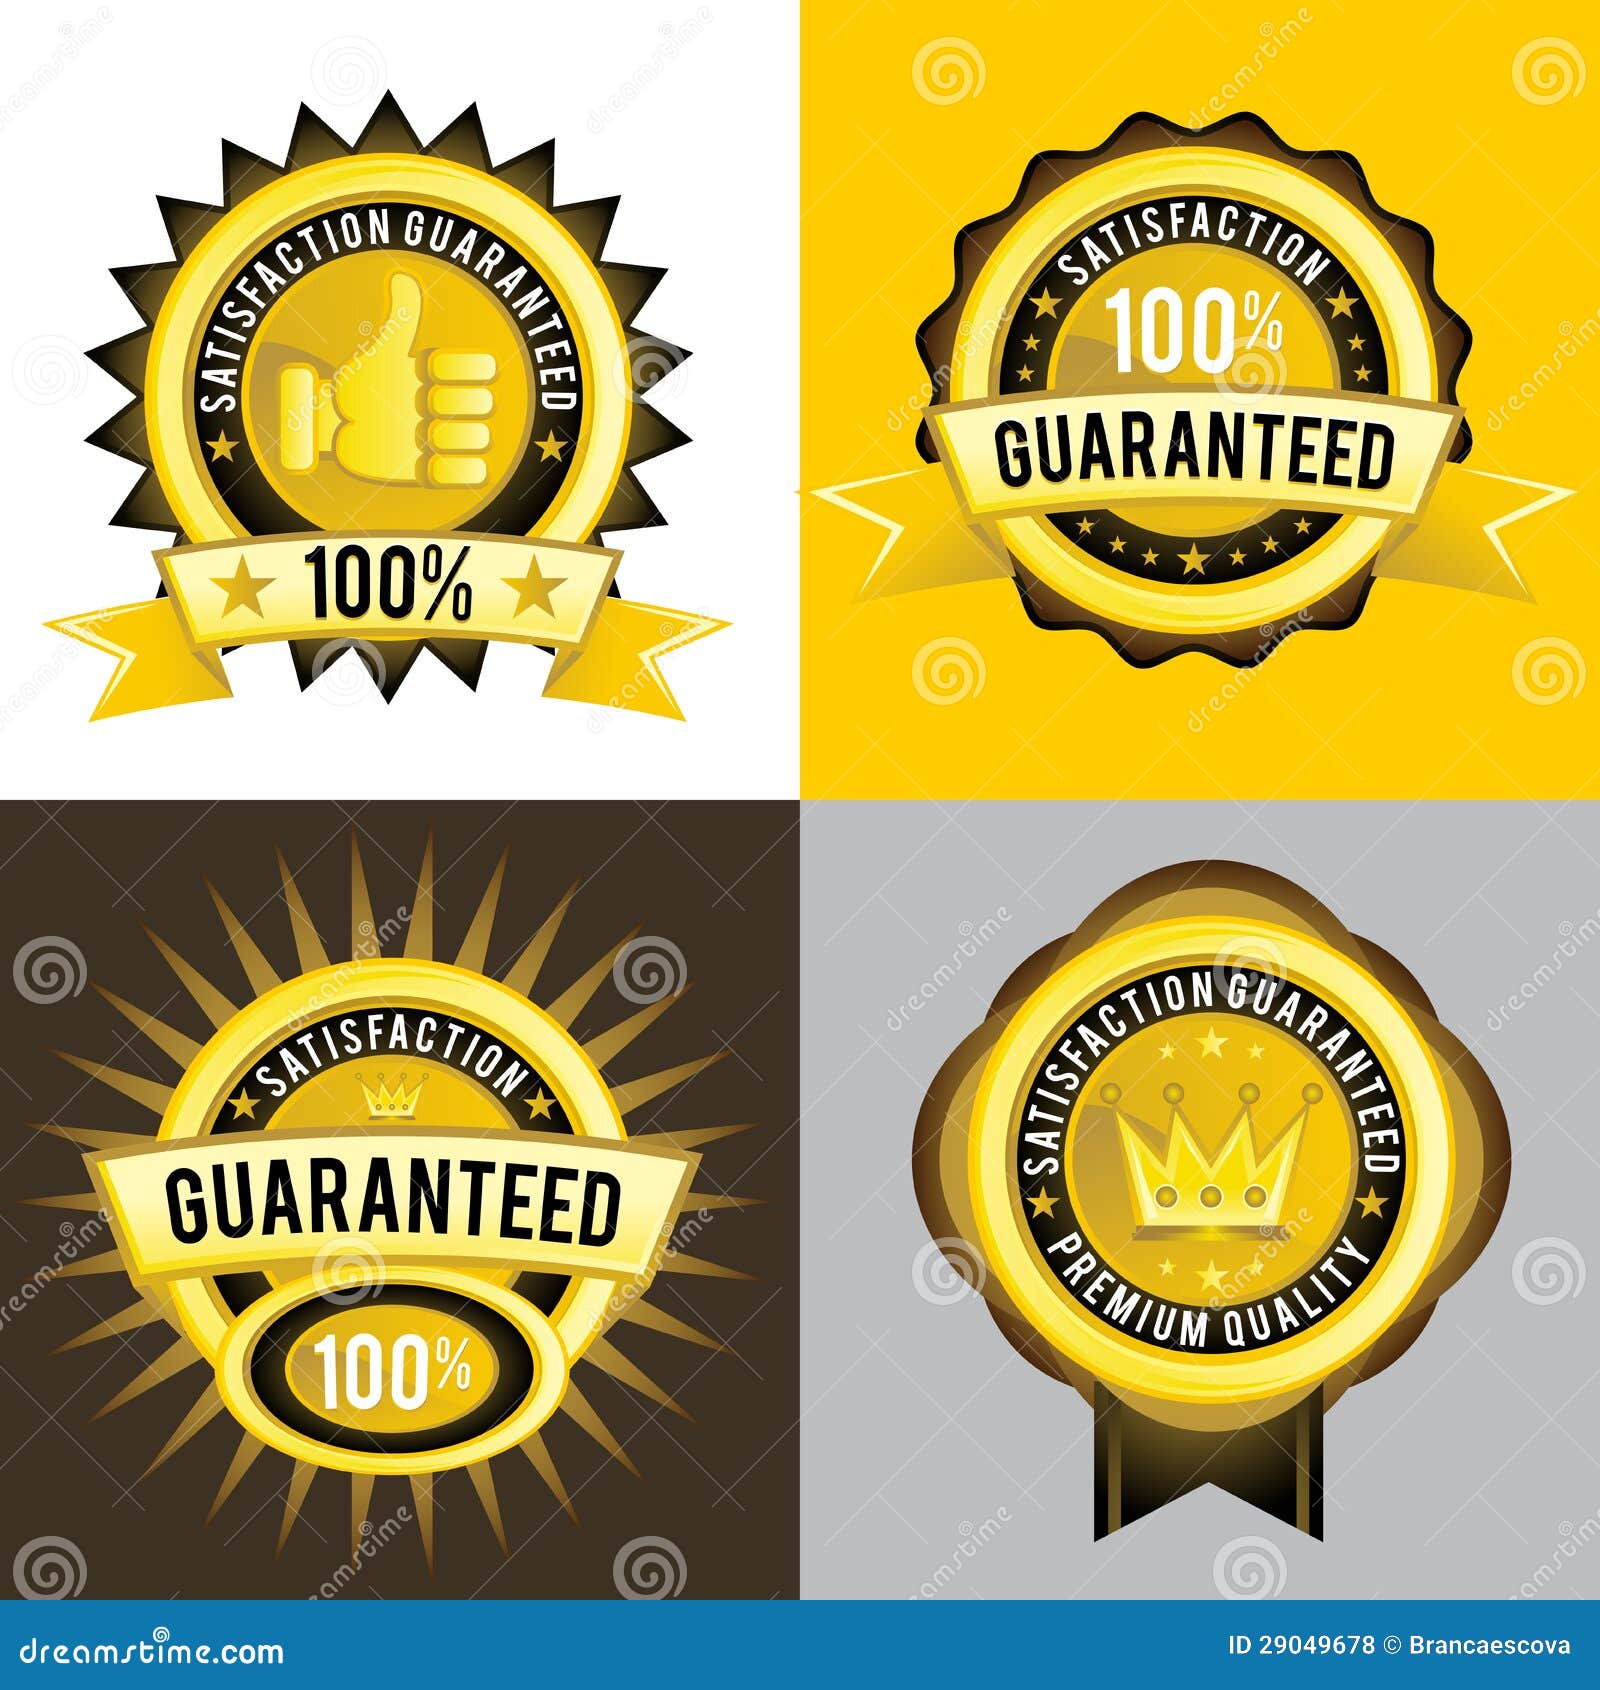 Satisfaction Guaranteed and Premium Quality Golden Labels Stock Vector ...